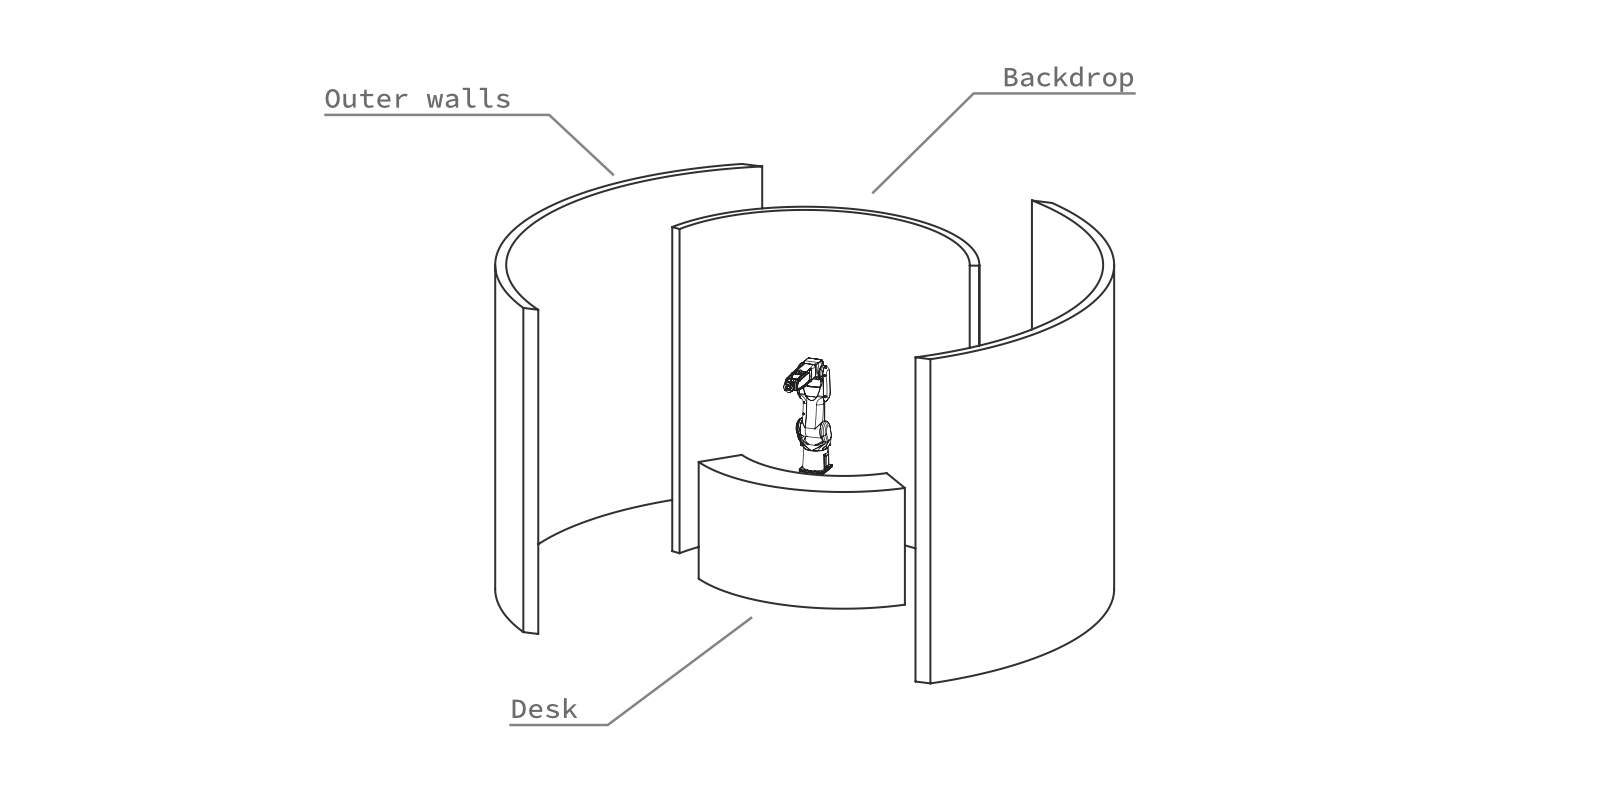 Schematic of circular room concept with robot in center.